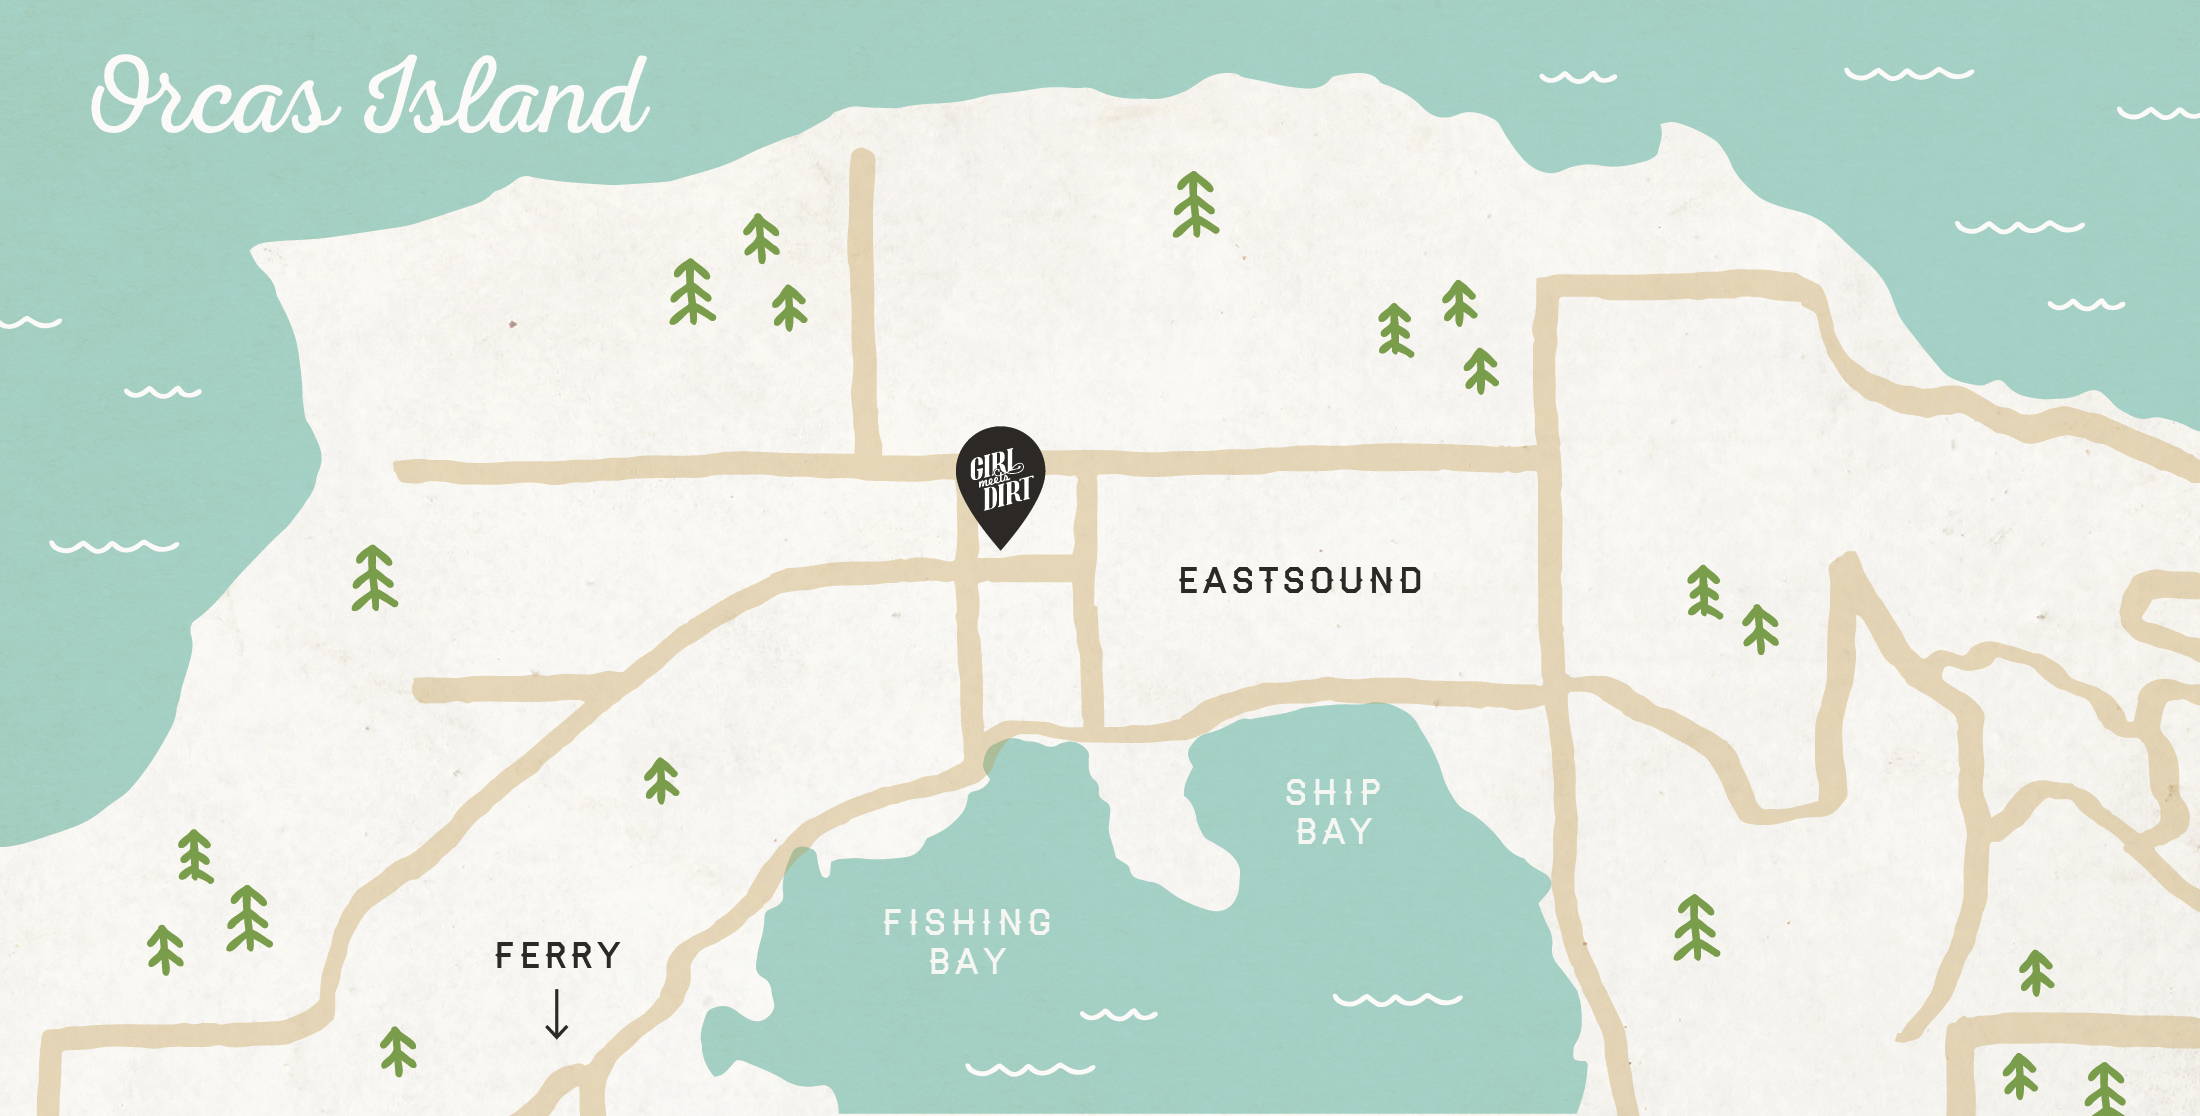 Illustrated map of Orcas Island with the location of Girl Meets Dirt identified with a small logo.